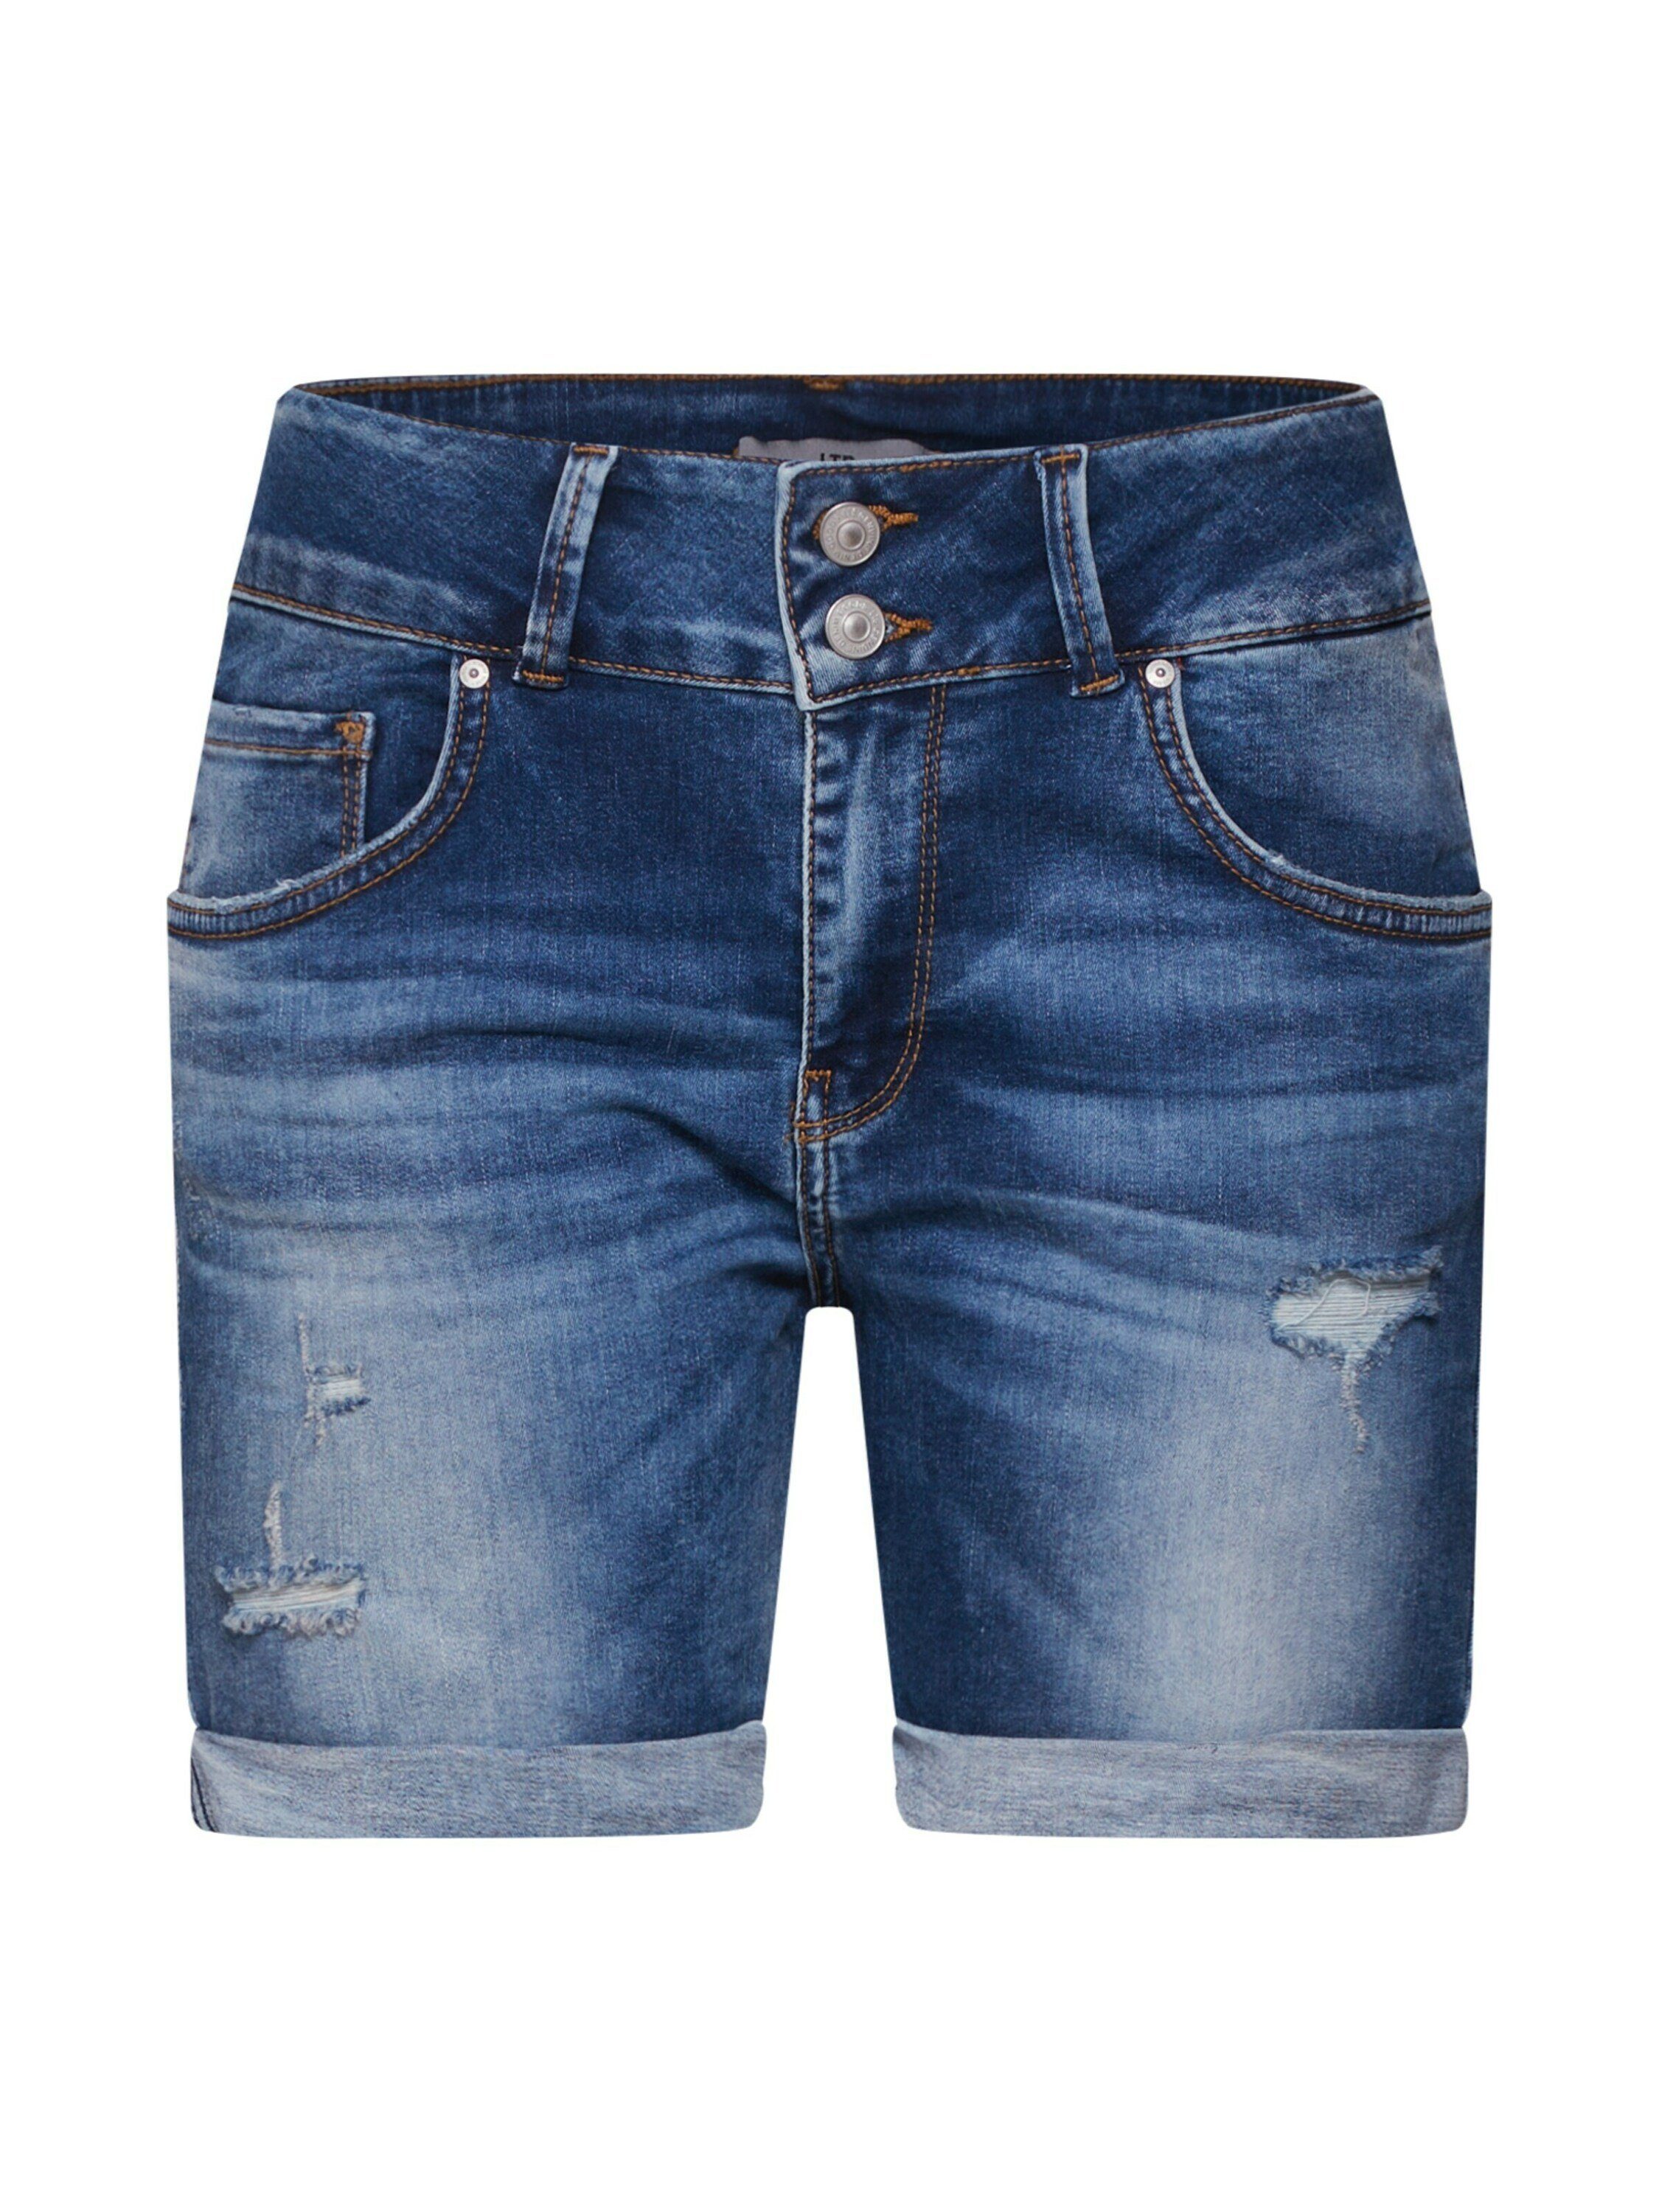 LTB Jeansshorts Becky (1-tlg) Plain/ohne Details, Cut-Outs, Weiteres Detail